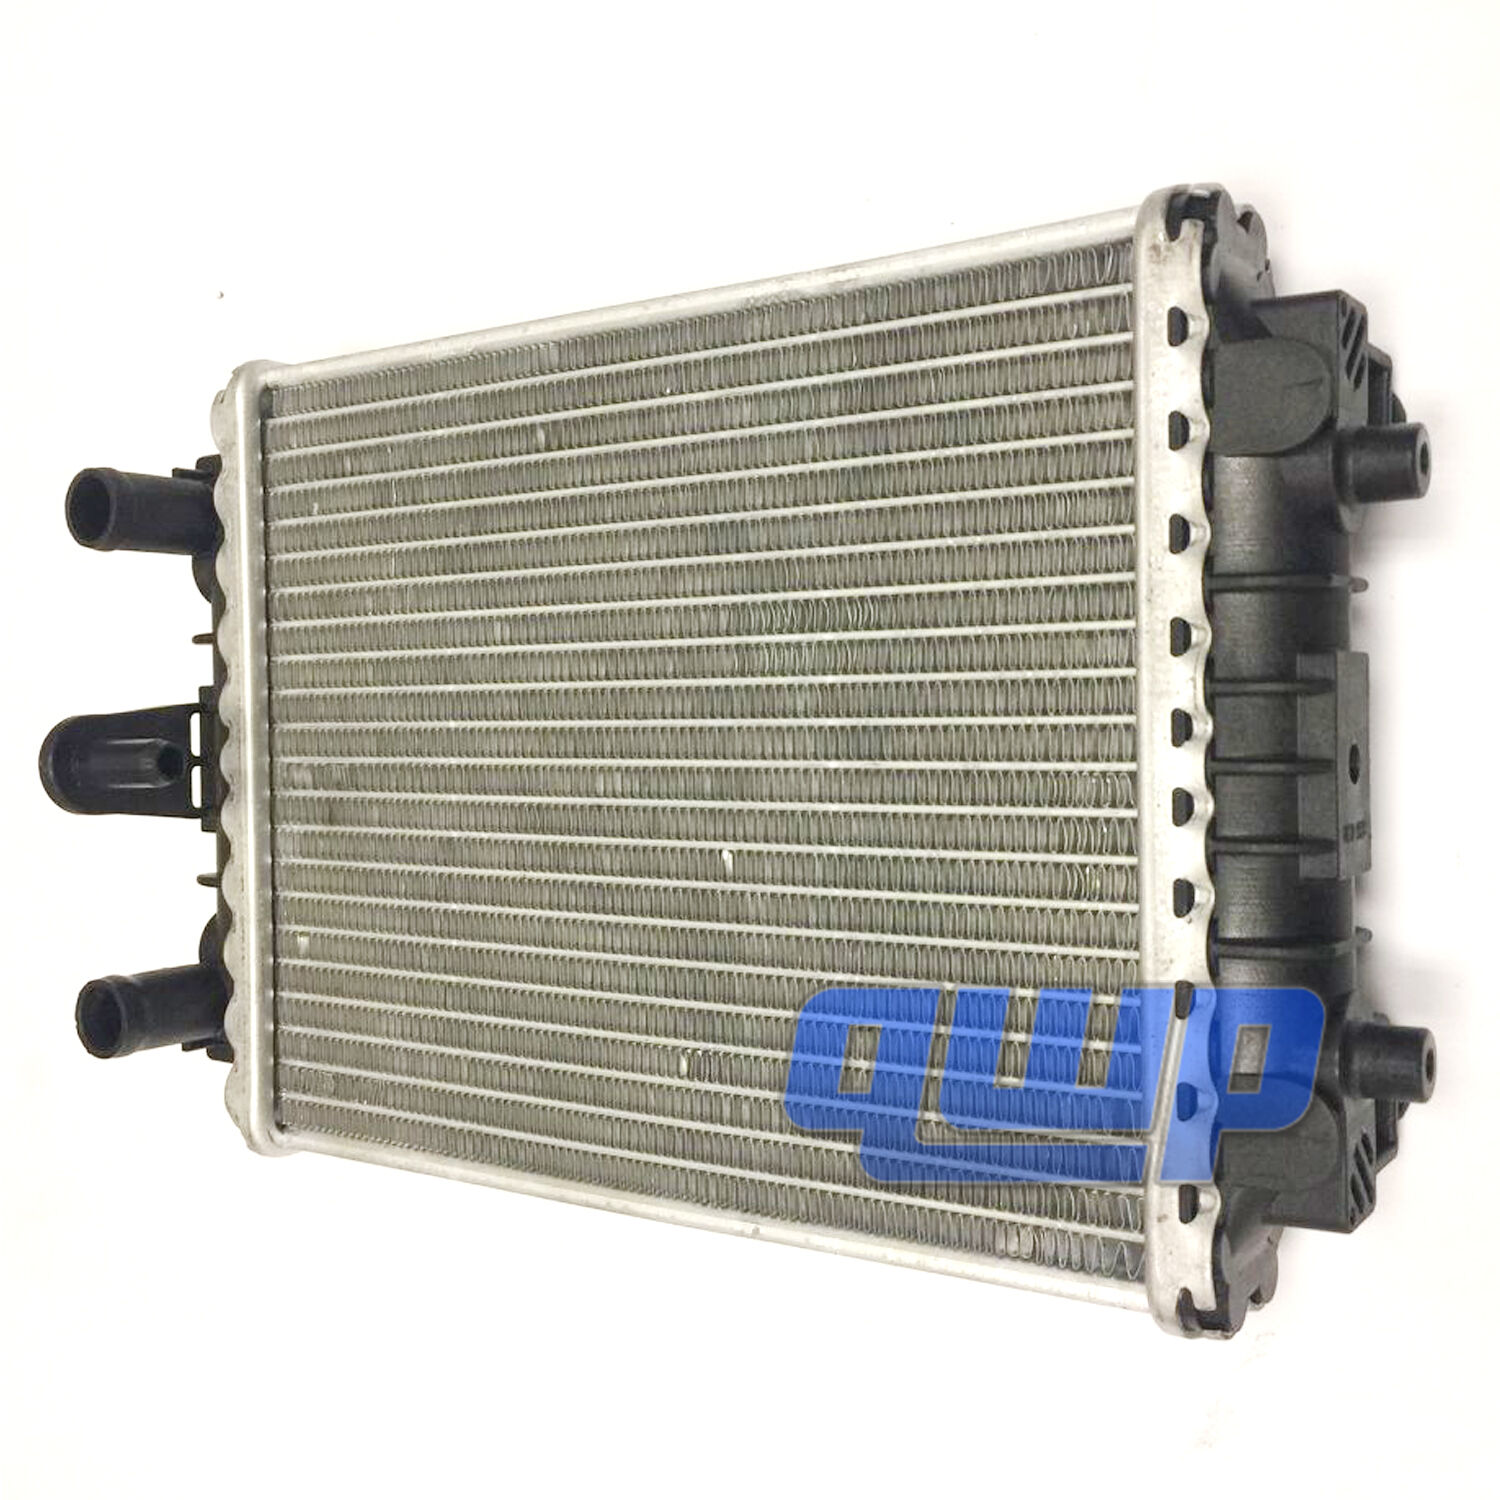 Left Secondary / Auxiliary Radiator For Audi S4 S5 S7 SQ5 Q5 A7 A8 Quattro 3.0L